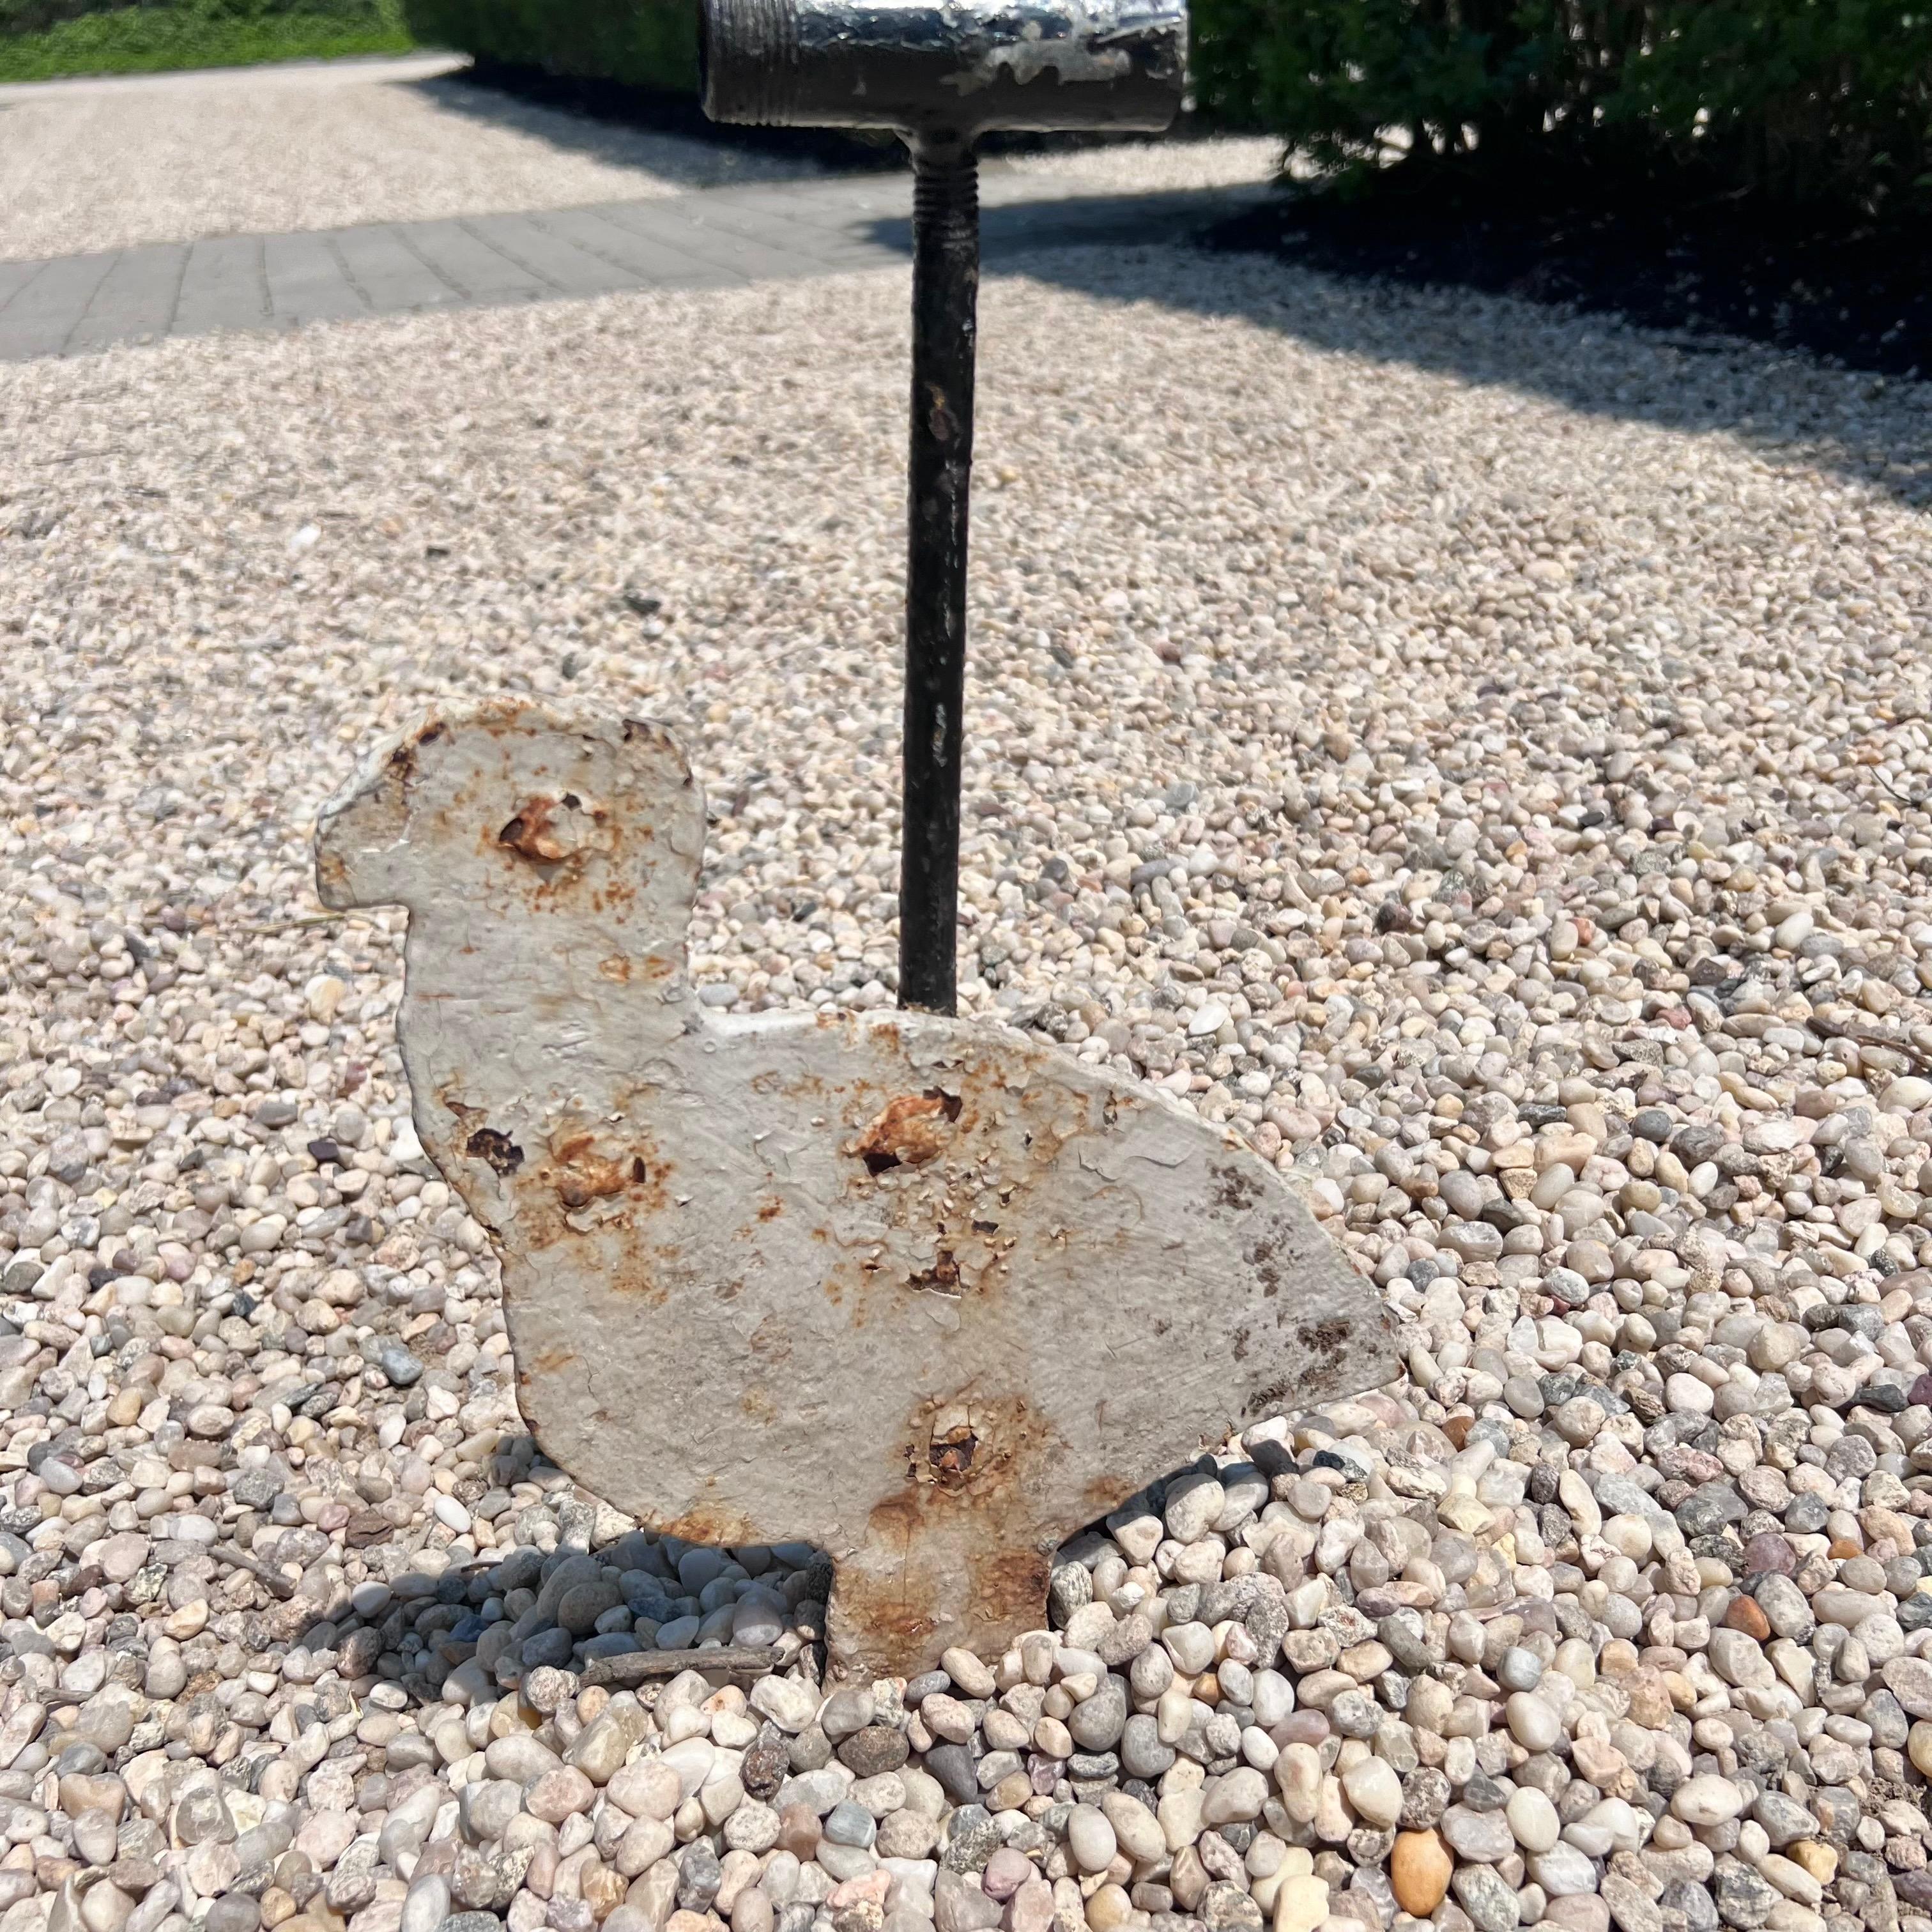 Very interesting heavy metal shooting target. Figure of a small chicken is attached to a metal post with a hollow tube at the top which a cable would run through suspending this target in the air. Figure is on a hinge so when you hit the target, the